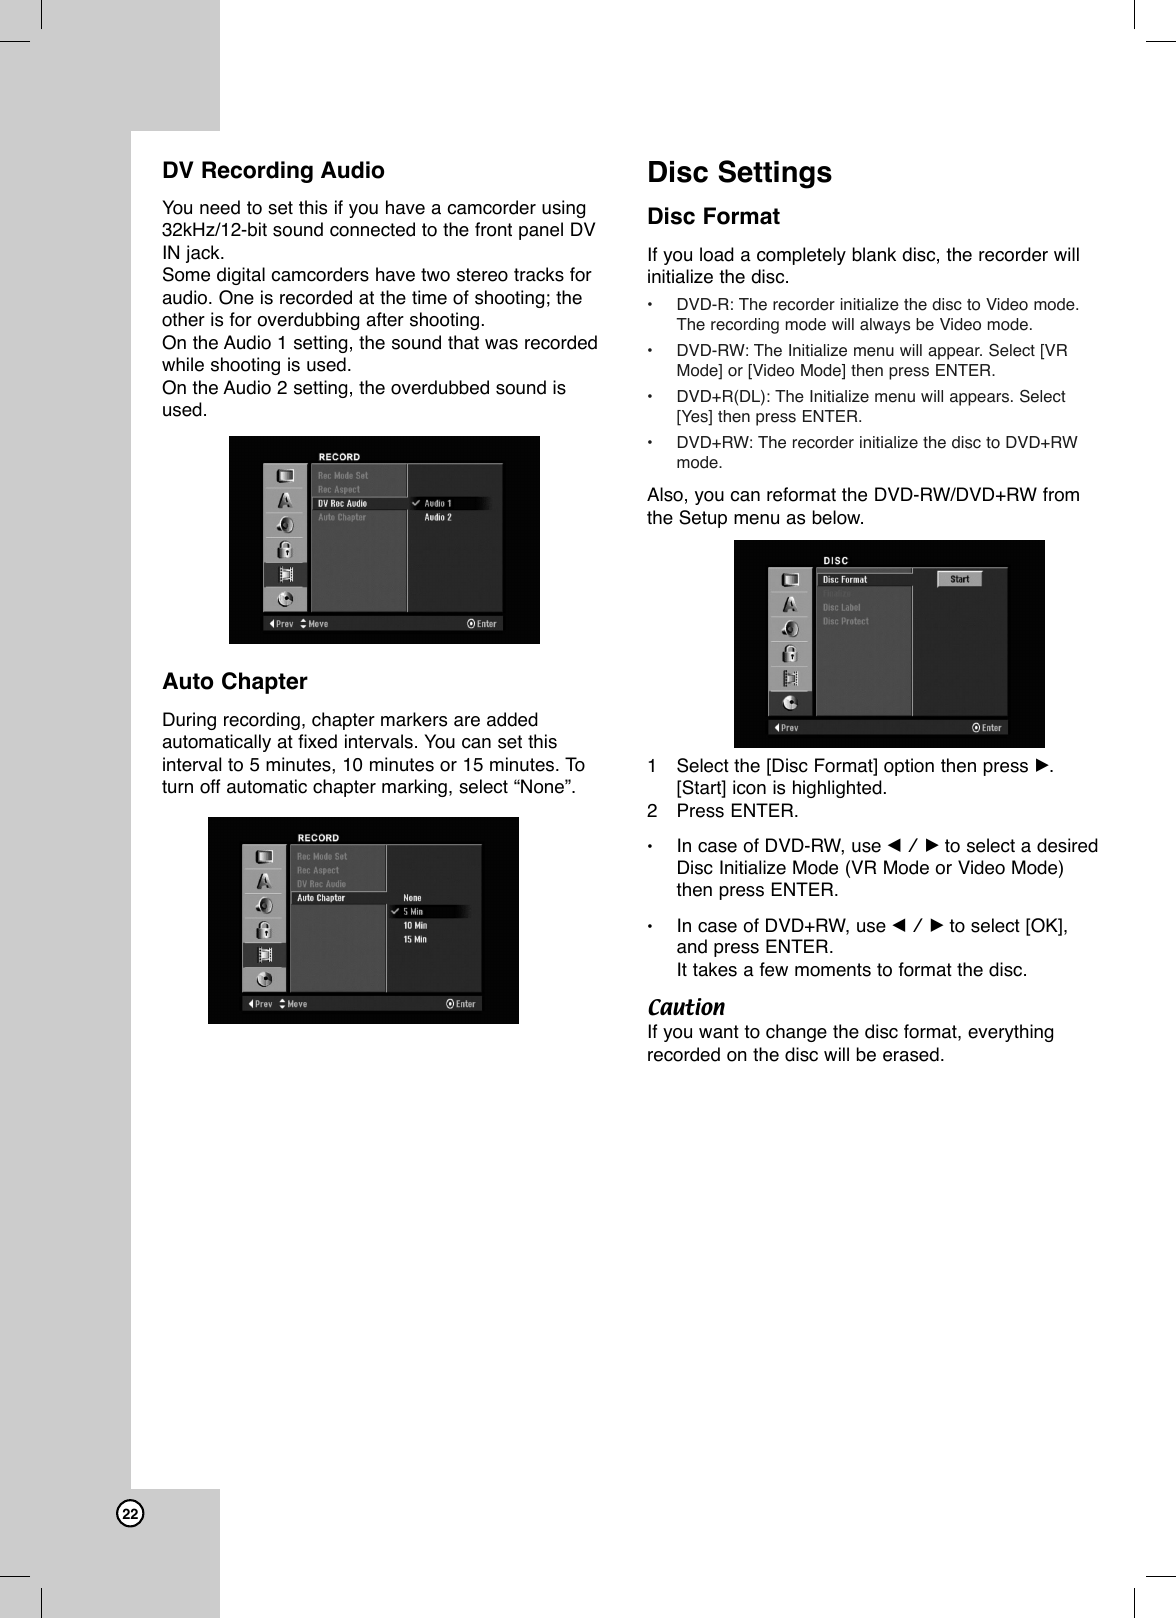 22DV Recording AudioYou need to set this if you have a camcorder using32kHz/12-bit sound connected to the front panel DVIN jack.Some digital camcorders have two stereo tracks foraudio. One is recorded at the time of shooting; theother is for overdubbing after shooting.On the Audio 1 setting, the sound that was recordedwhile shooting is used. On the Audio 2 setting, the overdubbed sound isused.Auto ChapterDuring recording, chapter markers are addedautomatically at fixed intervals. You can set thisinterval to 5 minutes, 10 minutes or 15 minutes. Toturn off automatic chapter marking, select “None”.Disc SettingsDisc FormatIf you load a completely blank disc, the recorder willinitialize the disc. •DVD-R: The recorder initialize the disc to Video mode.The recording mode will always be Video mode.•DVD-RW: The Initialize menu will appear. Select [VRMode] or [Video Mode] then press ENTER.•DVD+R(DL): The Initialize menu will appears. Select[Yes] then press ENTER.  •DVD+RW: The recorder initialize the disc to DVD+RWmode.  Also, you can reformat the DVD-RW/DVD+RW fromthe Setup menu as below.1Select the [Disc Format] option then press B. [Start] icon is highlighted.2Press ENTER.•In case of DVD-RW, use b / B to select a desiredDisc Initialize Mode (VR Mode or Video Mode)then press ENTER.•In case of DVD+RW, use b / B to select [OK],and press ENTER.It takes a few moments to format the disc.CautionIf you want to change the disc format, everythingrecorded on the disc will be erased.